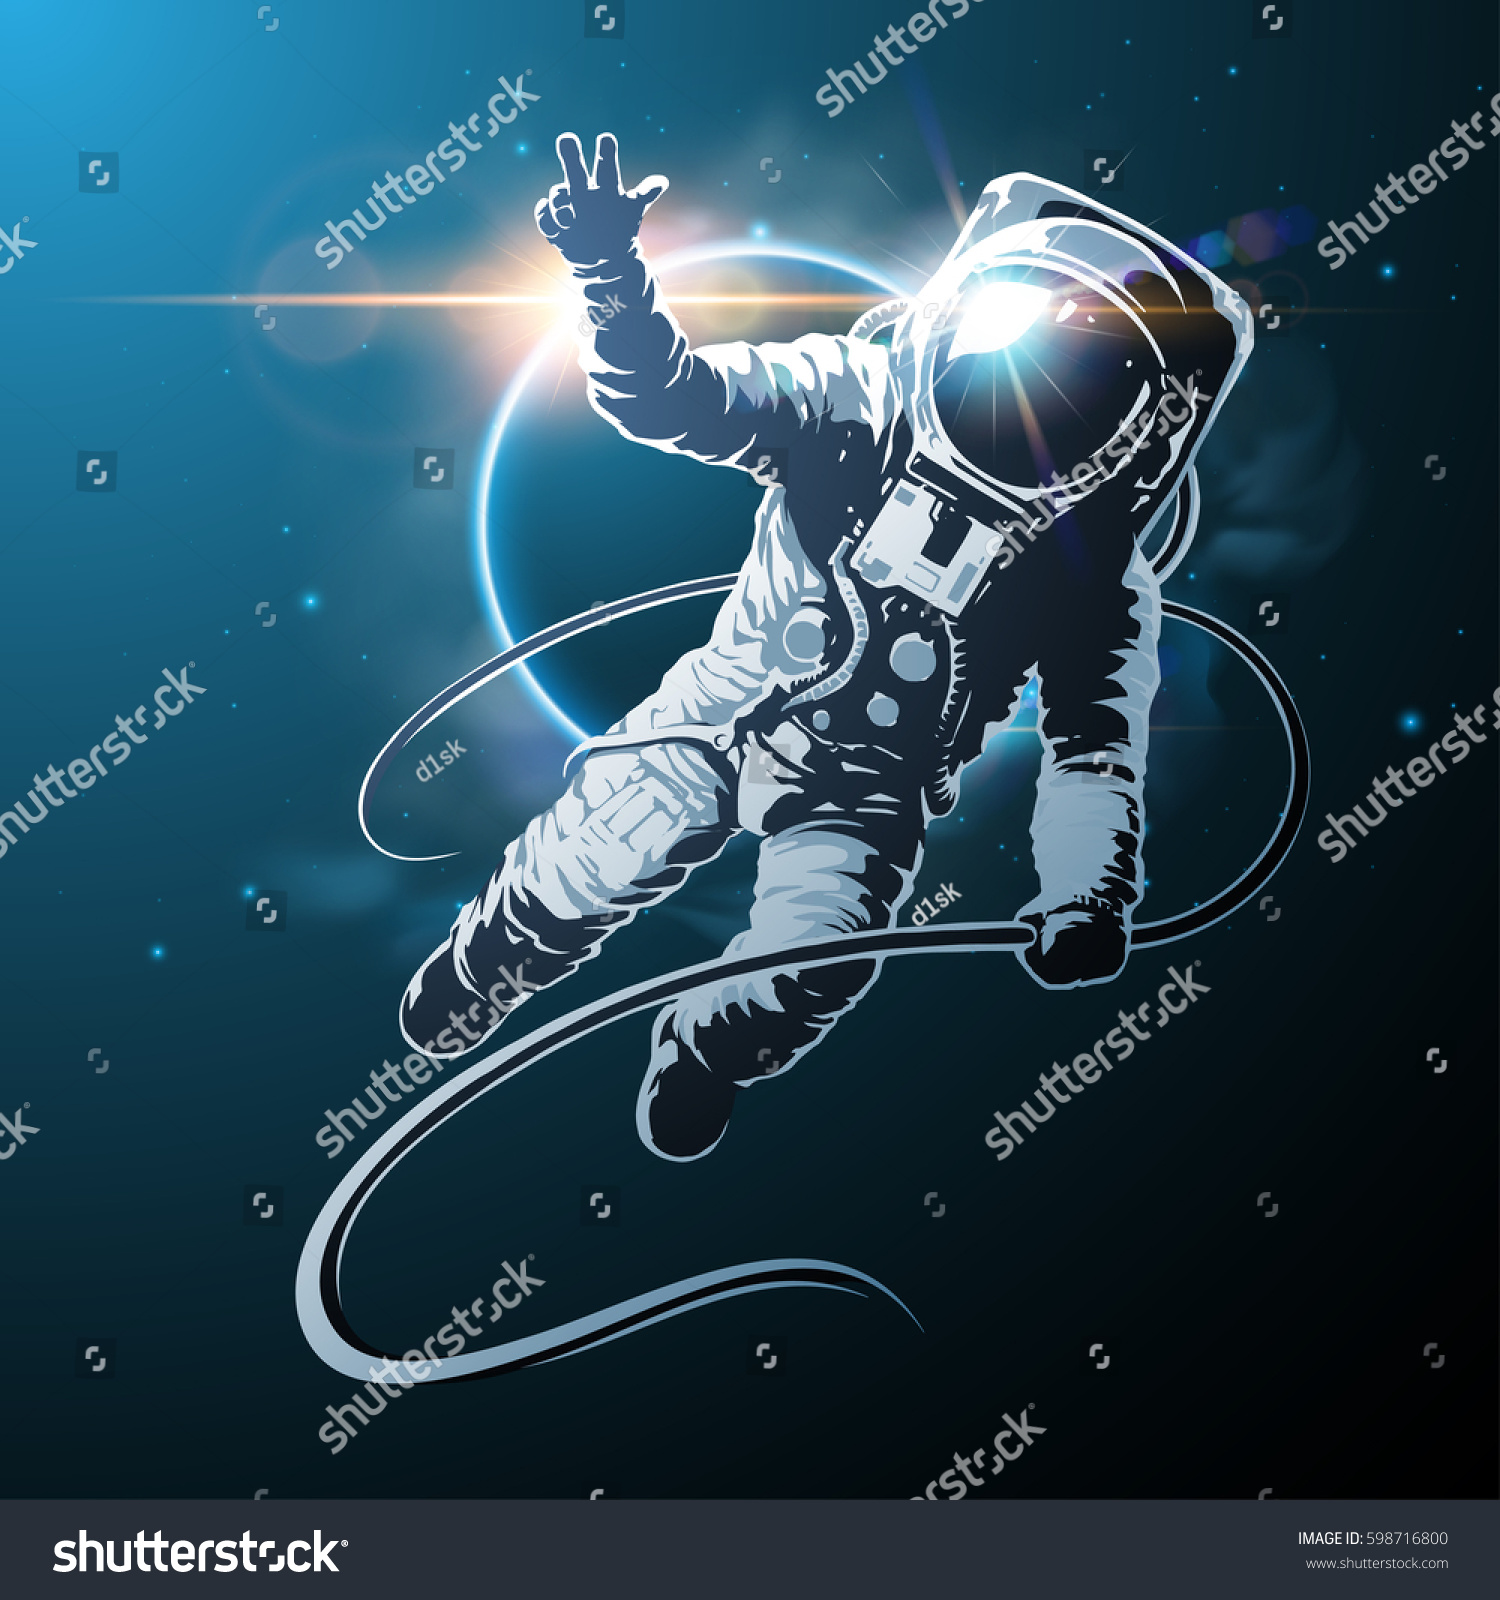 Astronaut Space Illustration Stock Vector HD (Royalty Free ...